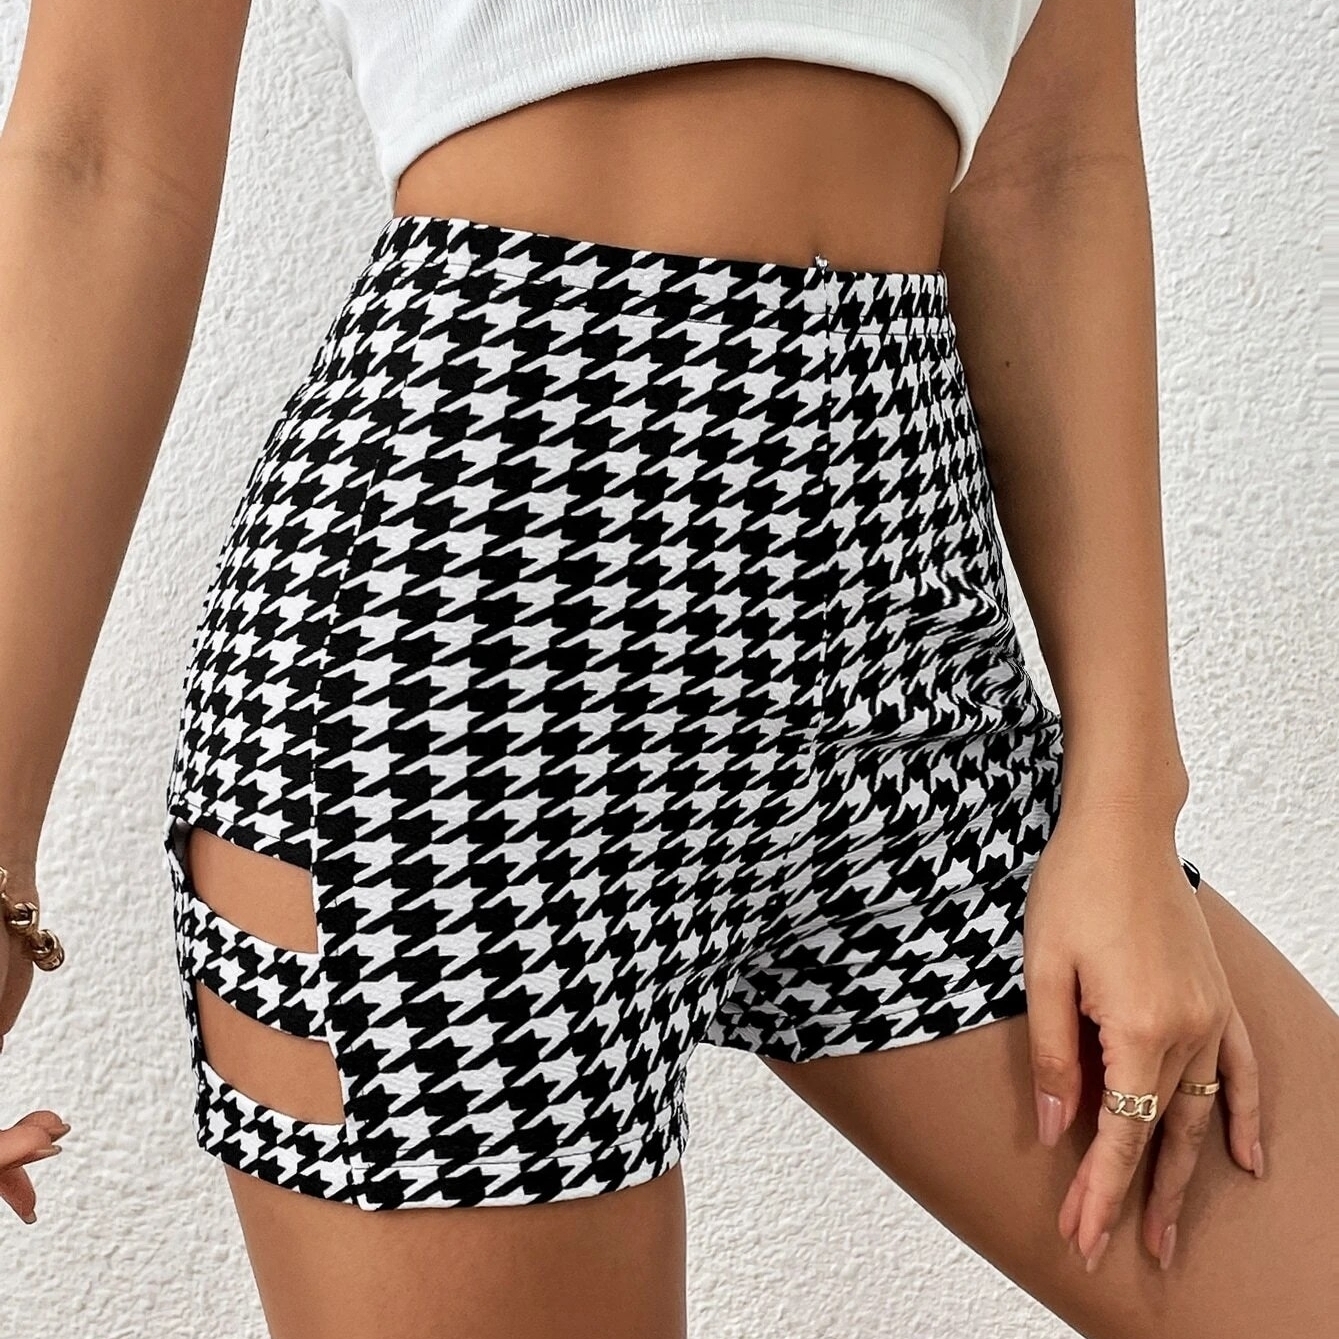 Houndstooth Print Cut Out Side Shorts - S